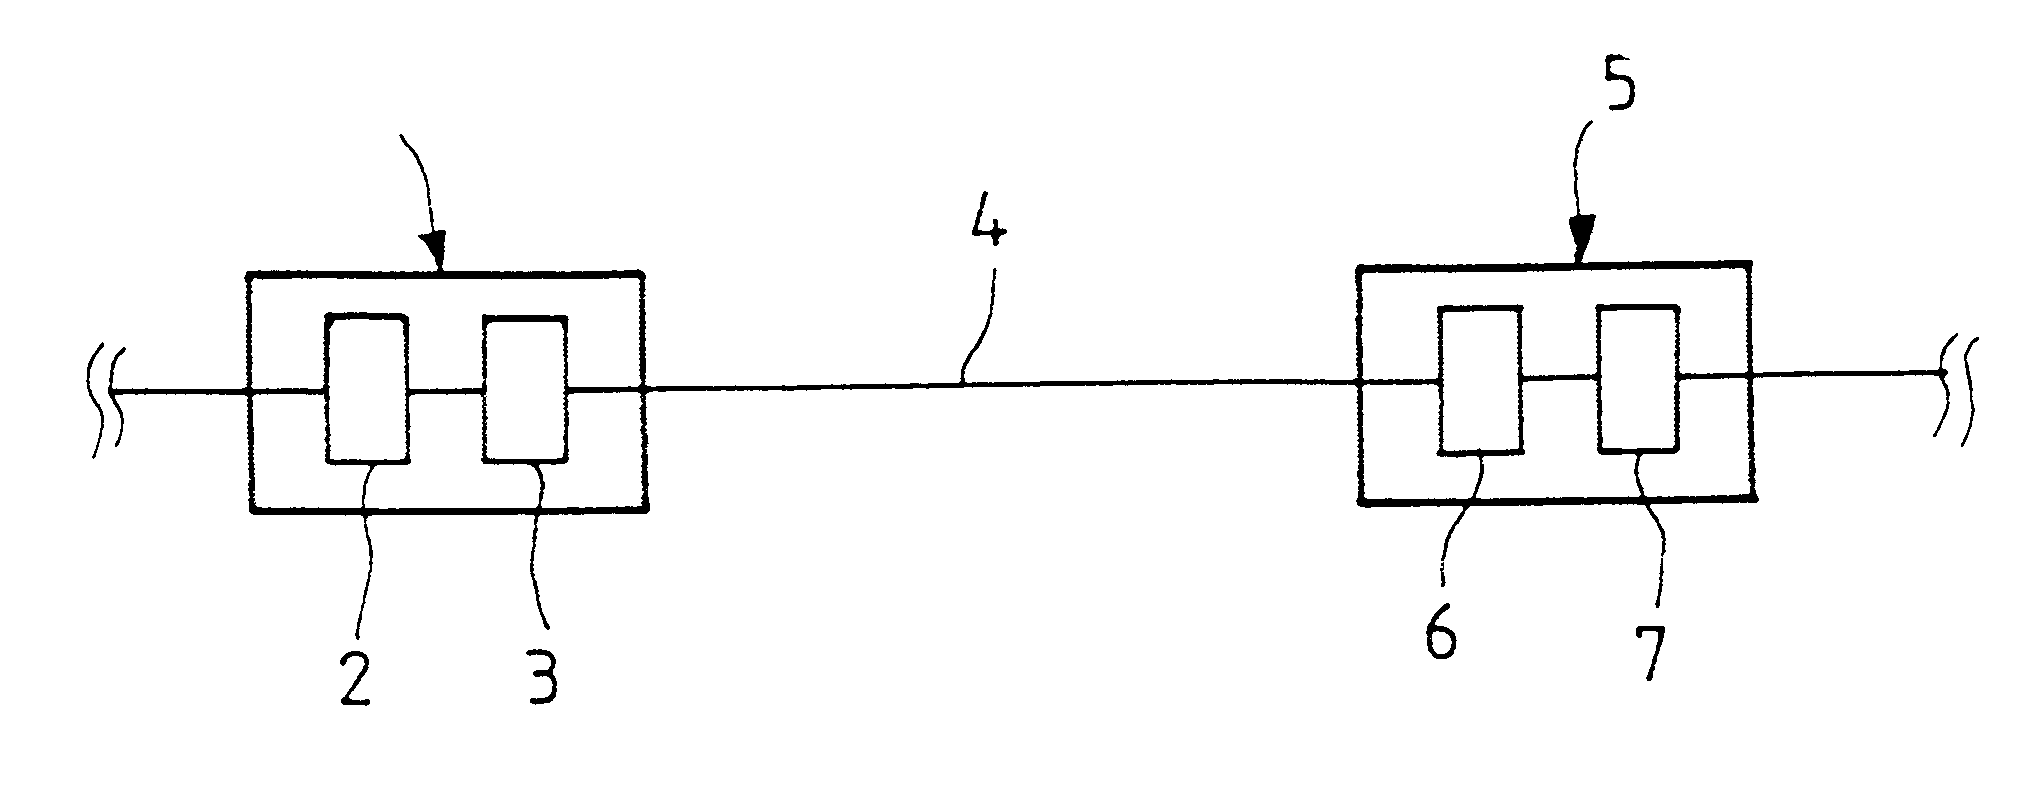 Optical amplifier with optimal gain excursion for different input powers